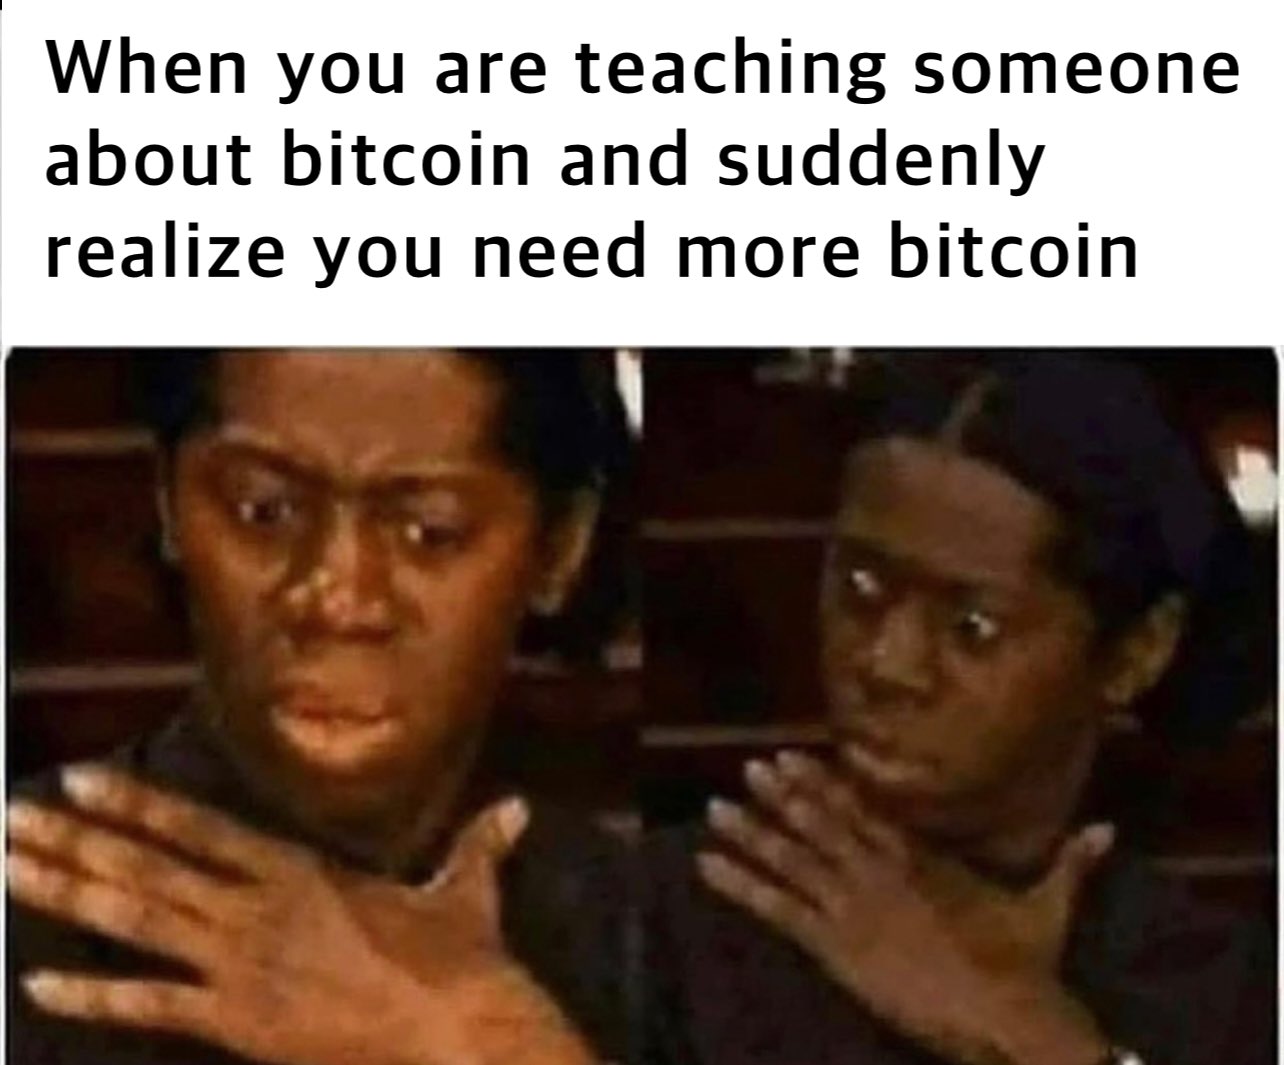 When you are teaching someone
about bitcoin and suddenly
realize you need more bitcoin